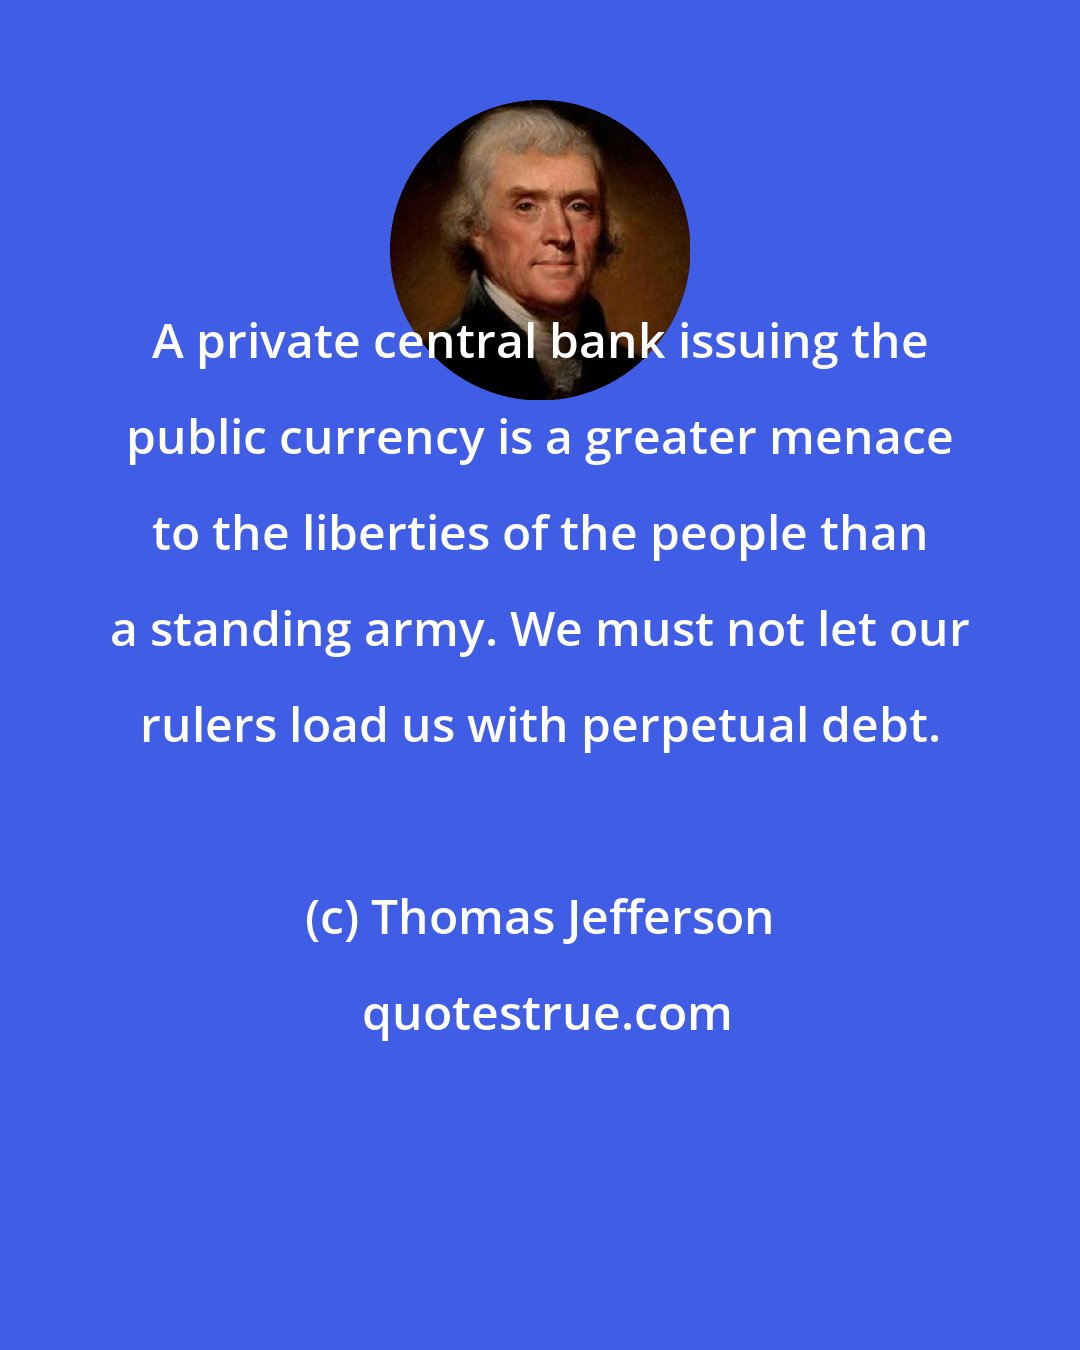 Thomas Jefferson: A private central bank issuing the public currency is a greater menace to the liberties of the people than a standing army. We must not let our rulers load us with perpetual debt.